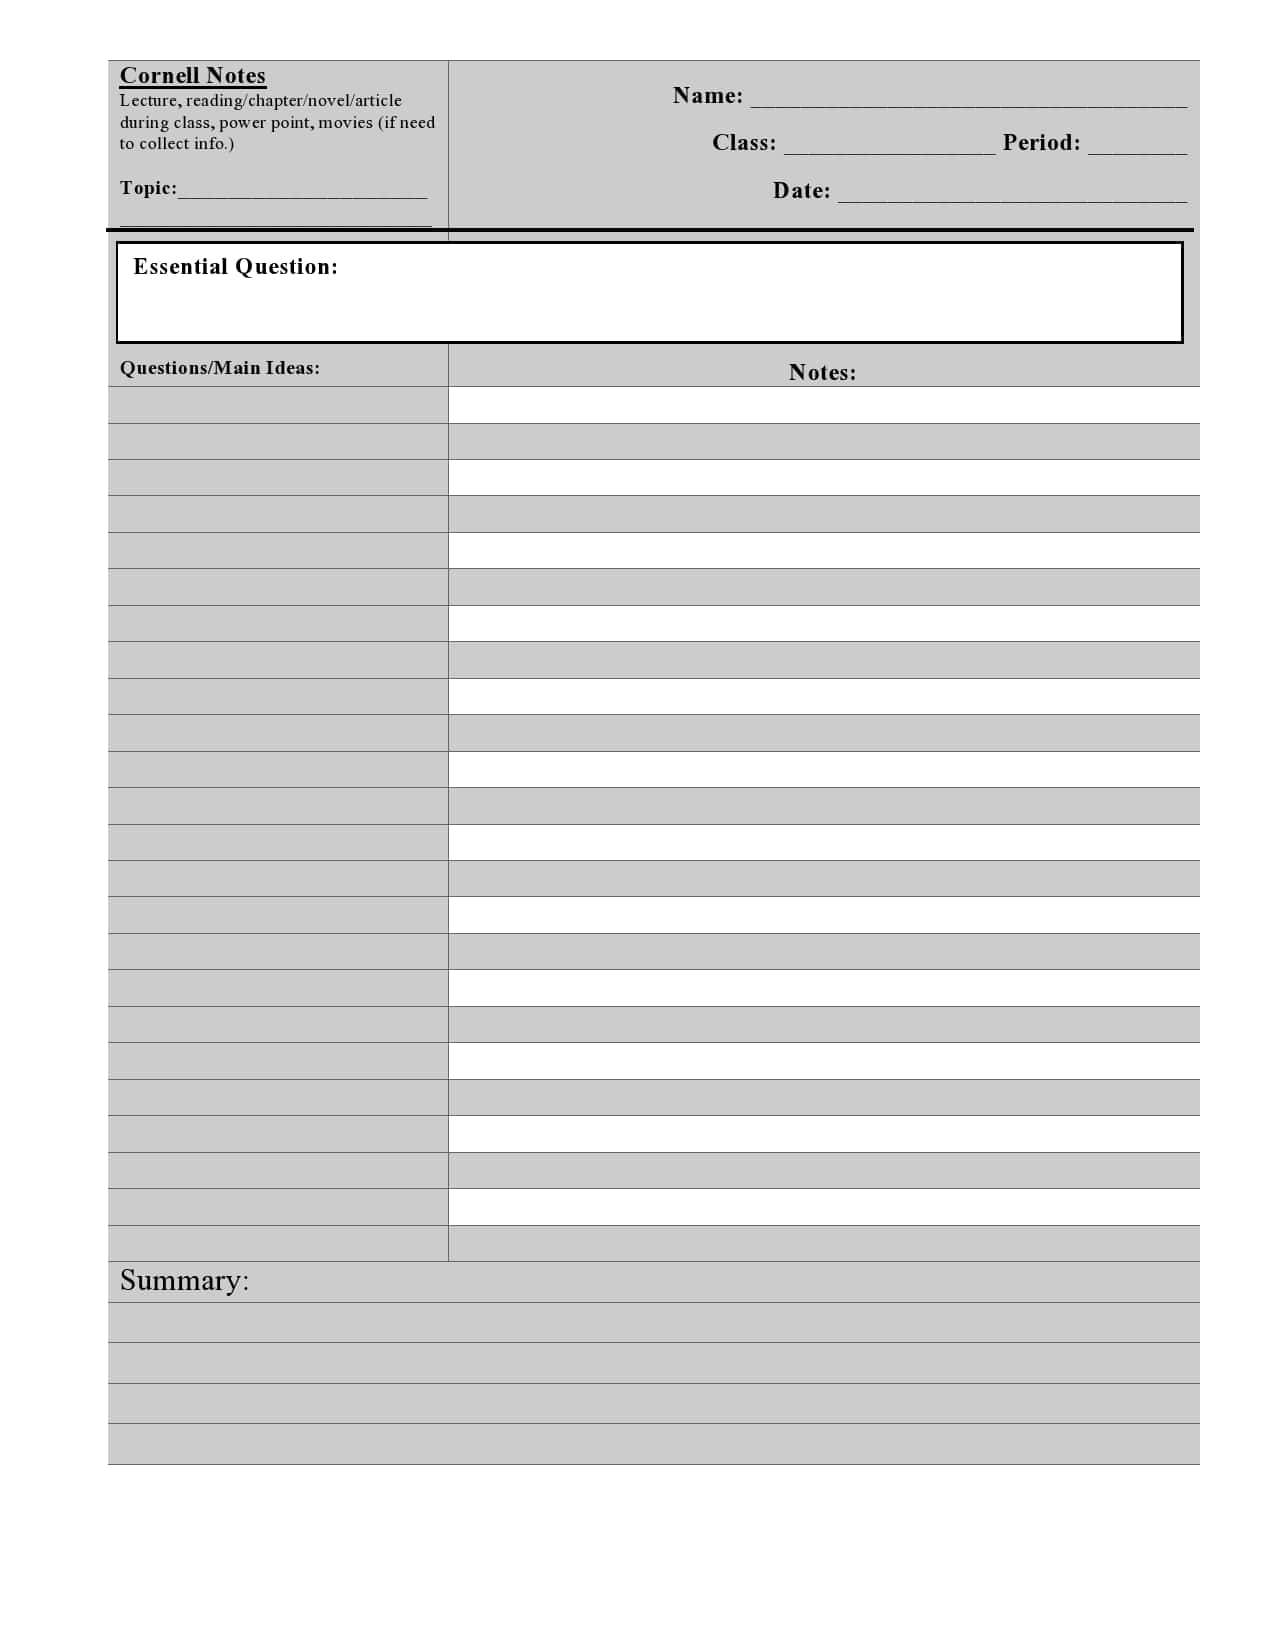 20 Printable Cornell Notes Templates [Free] - TemplateArchive Throughout Cornell Notes Template Doc